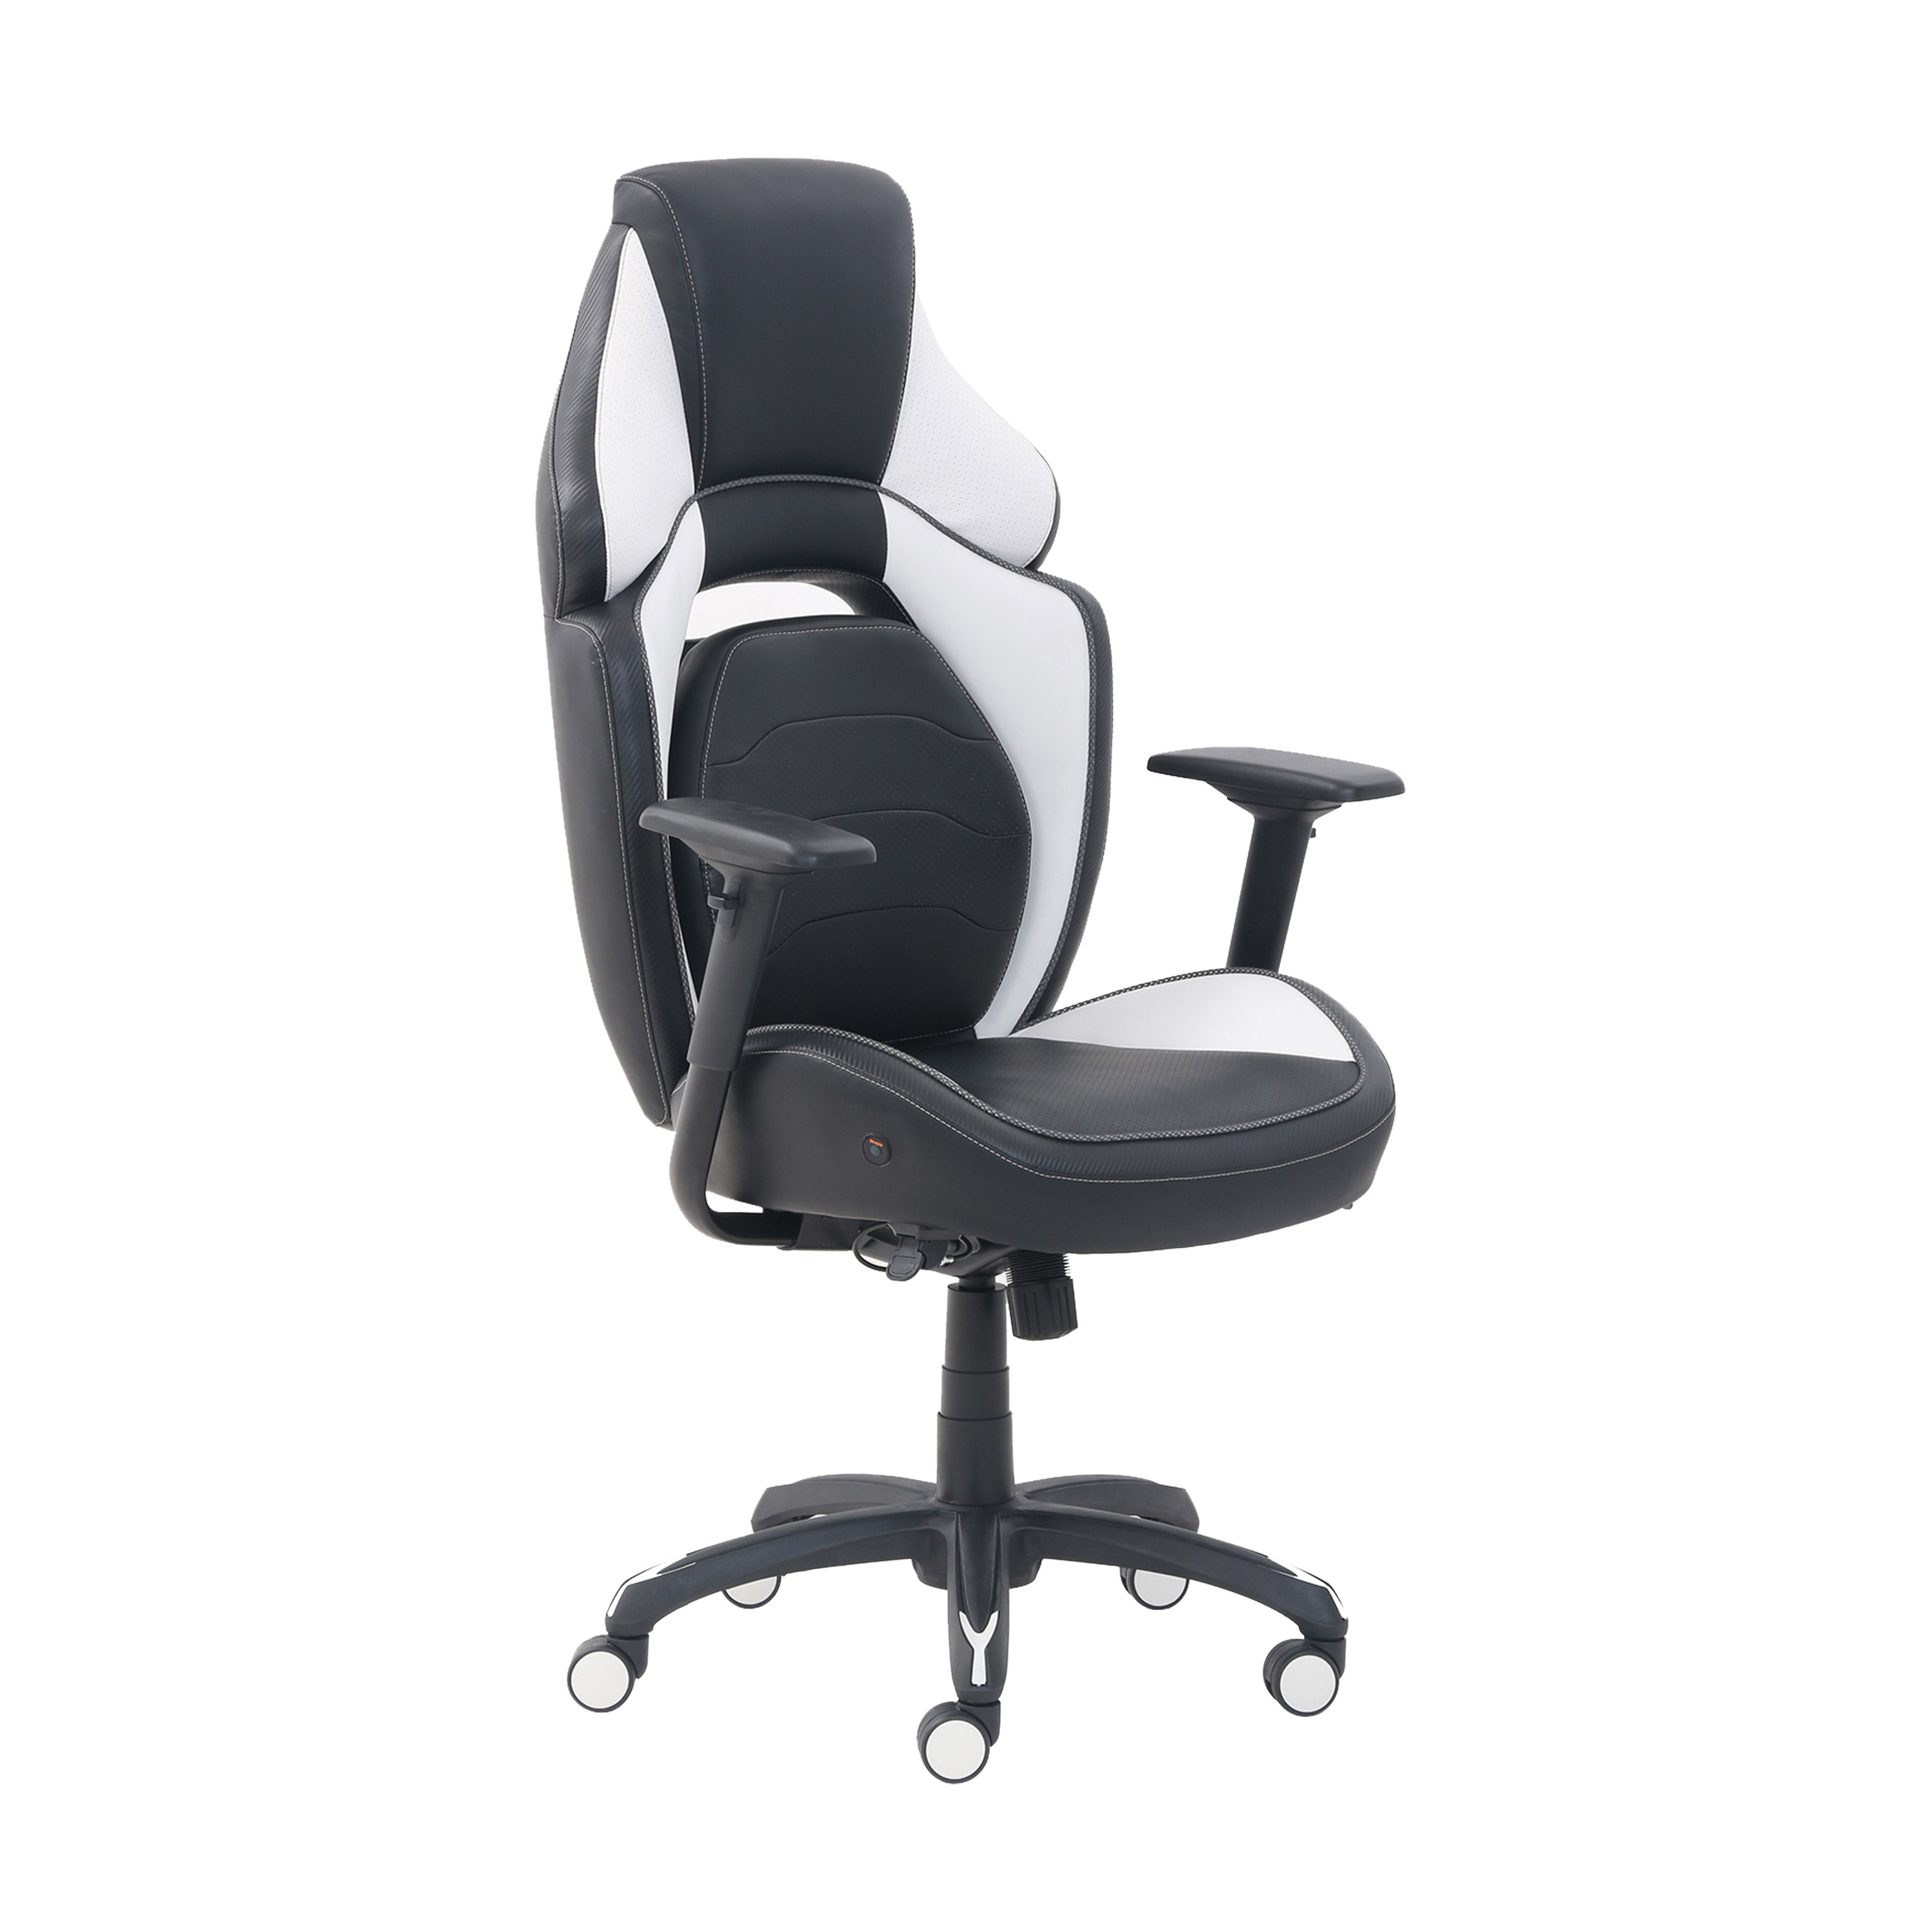 True Innovations High Back Gaming Office Chair with LED lining